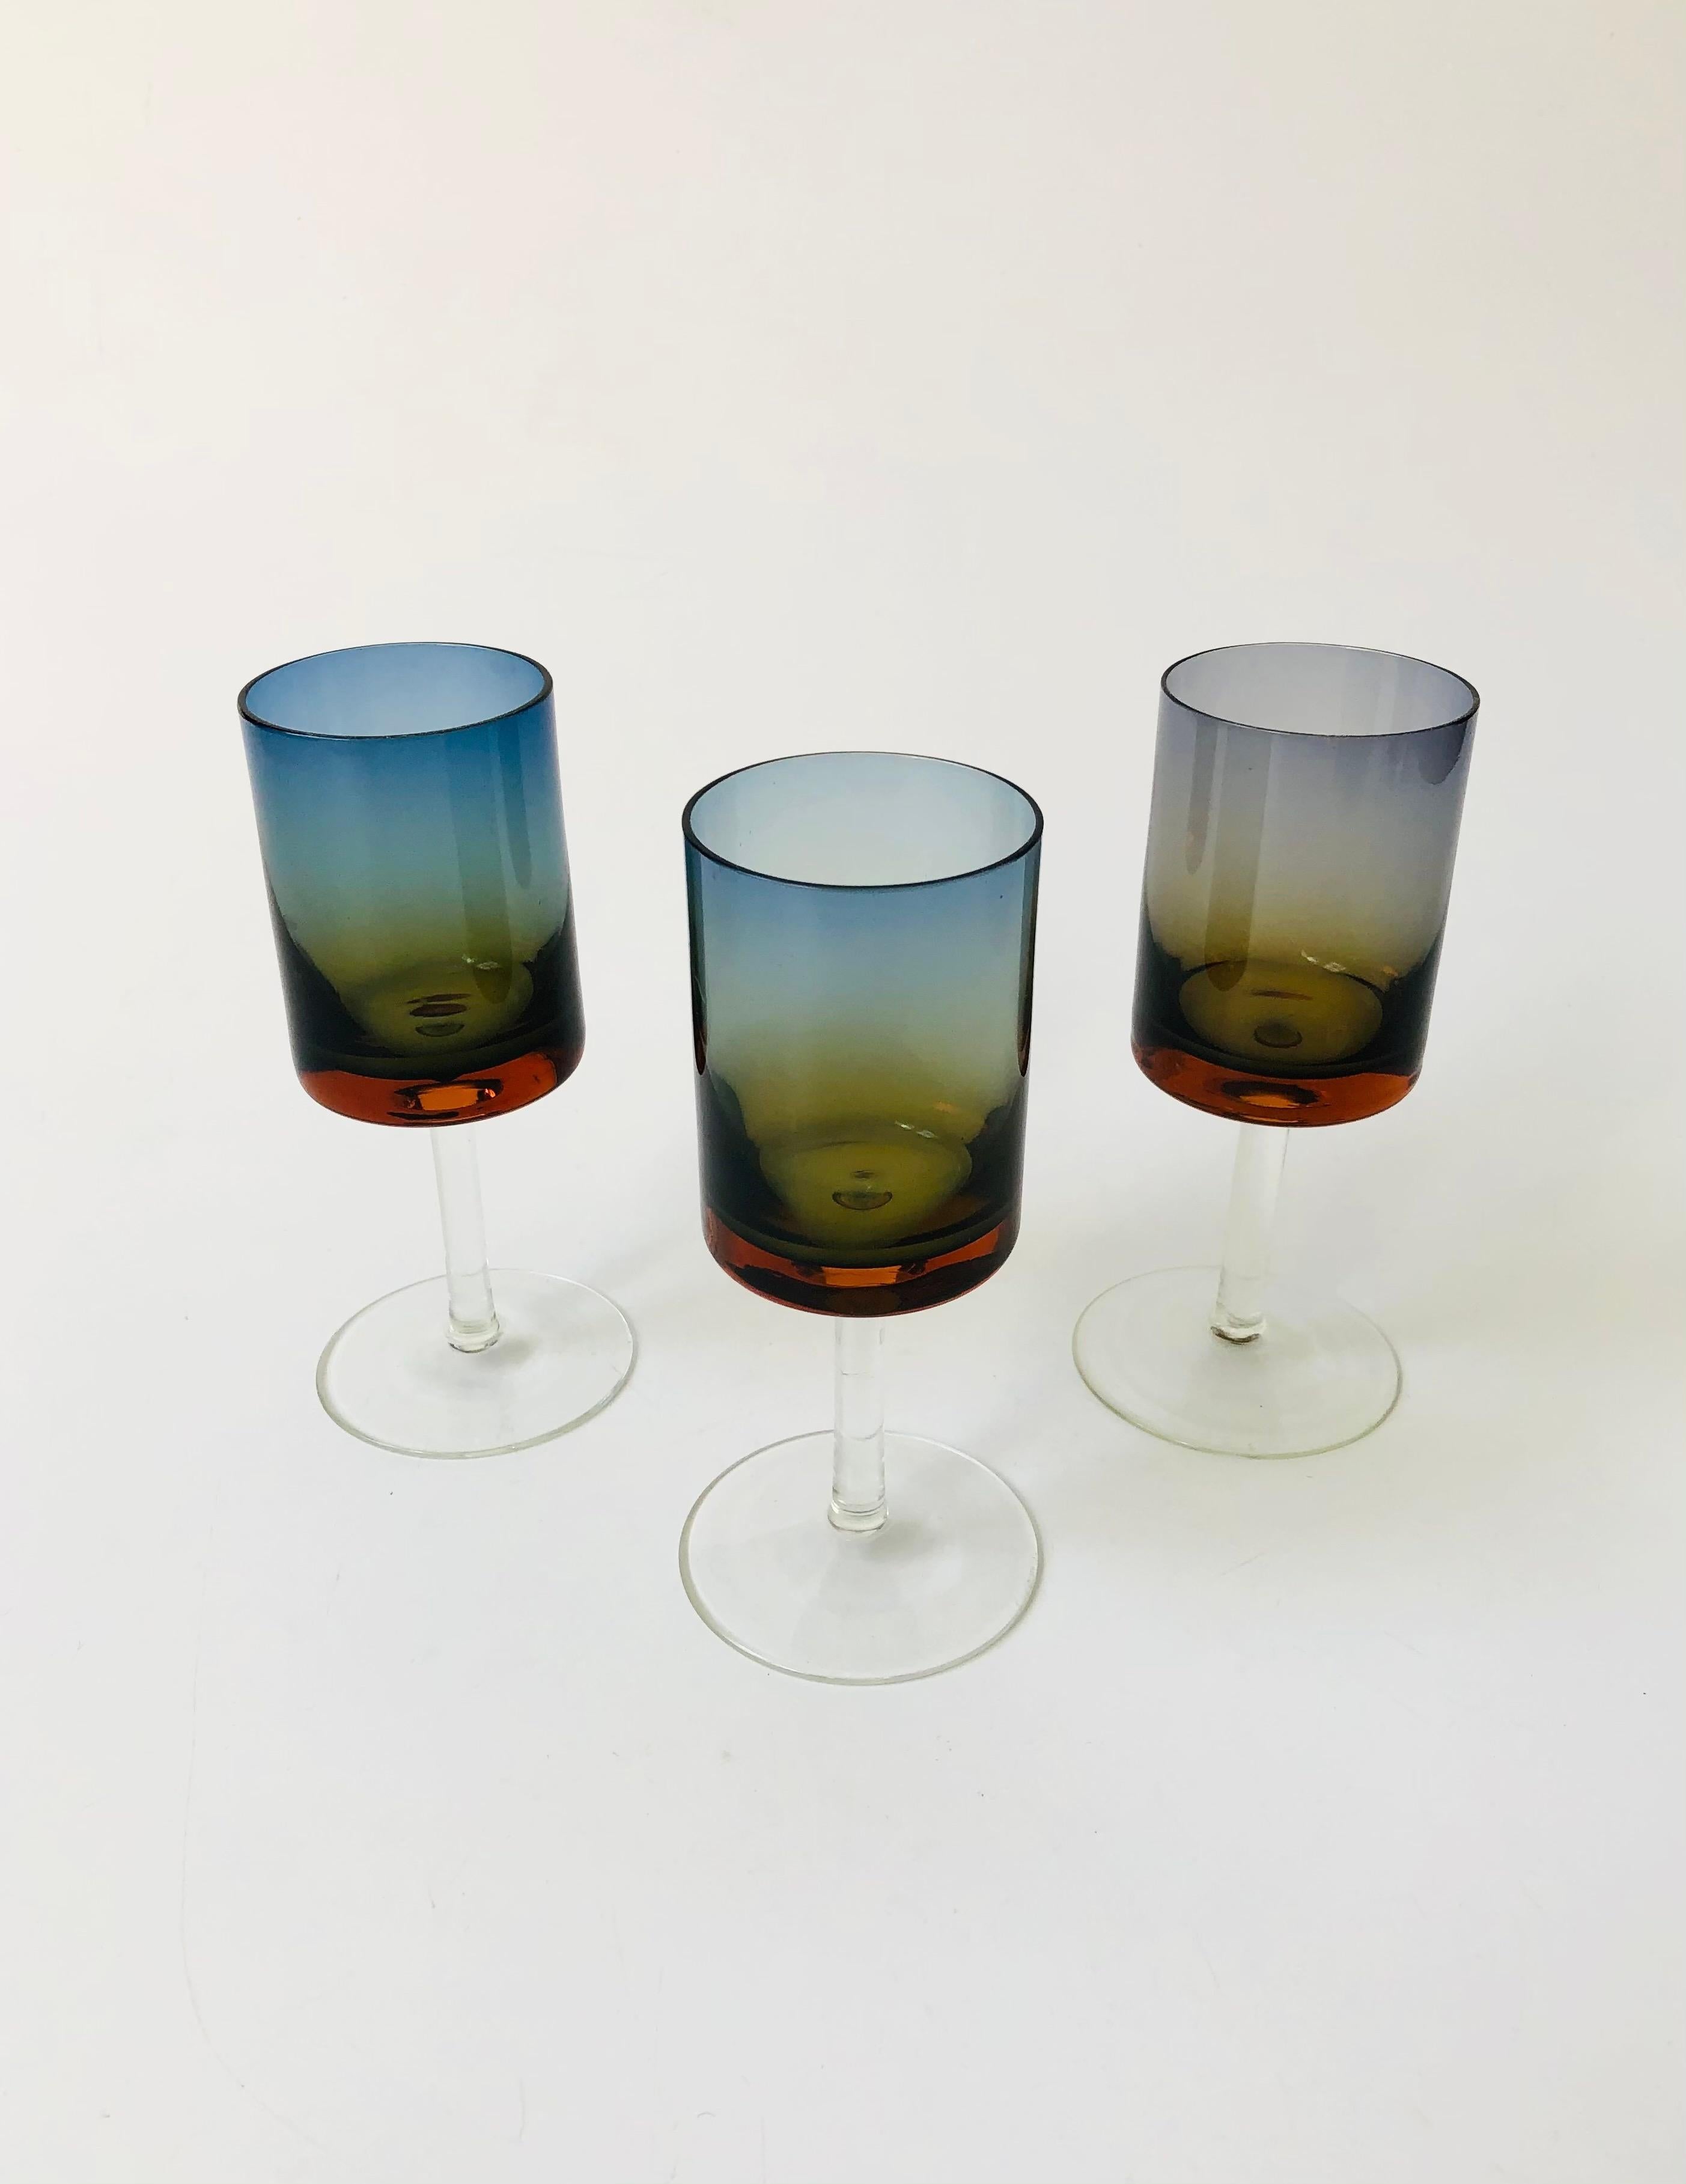 A set of 3 gorgeous rare mid century Blue Amberina stemmed glasses. Each glass has a cylindrical shape with a thin clear stem. Beautiful colouring to the tops fading from blue to amber. These are a smaller size than a wine glass and could be used